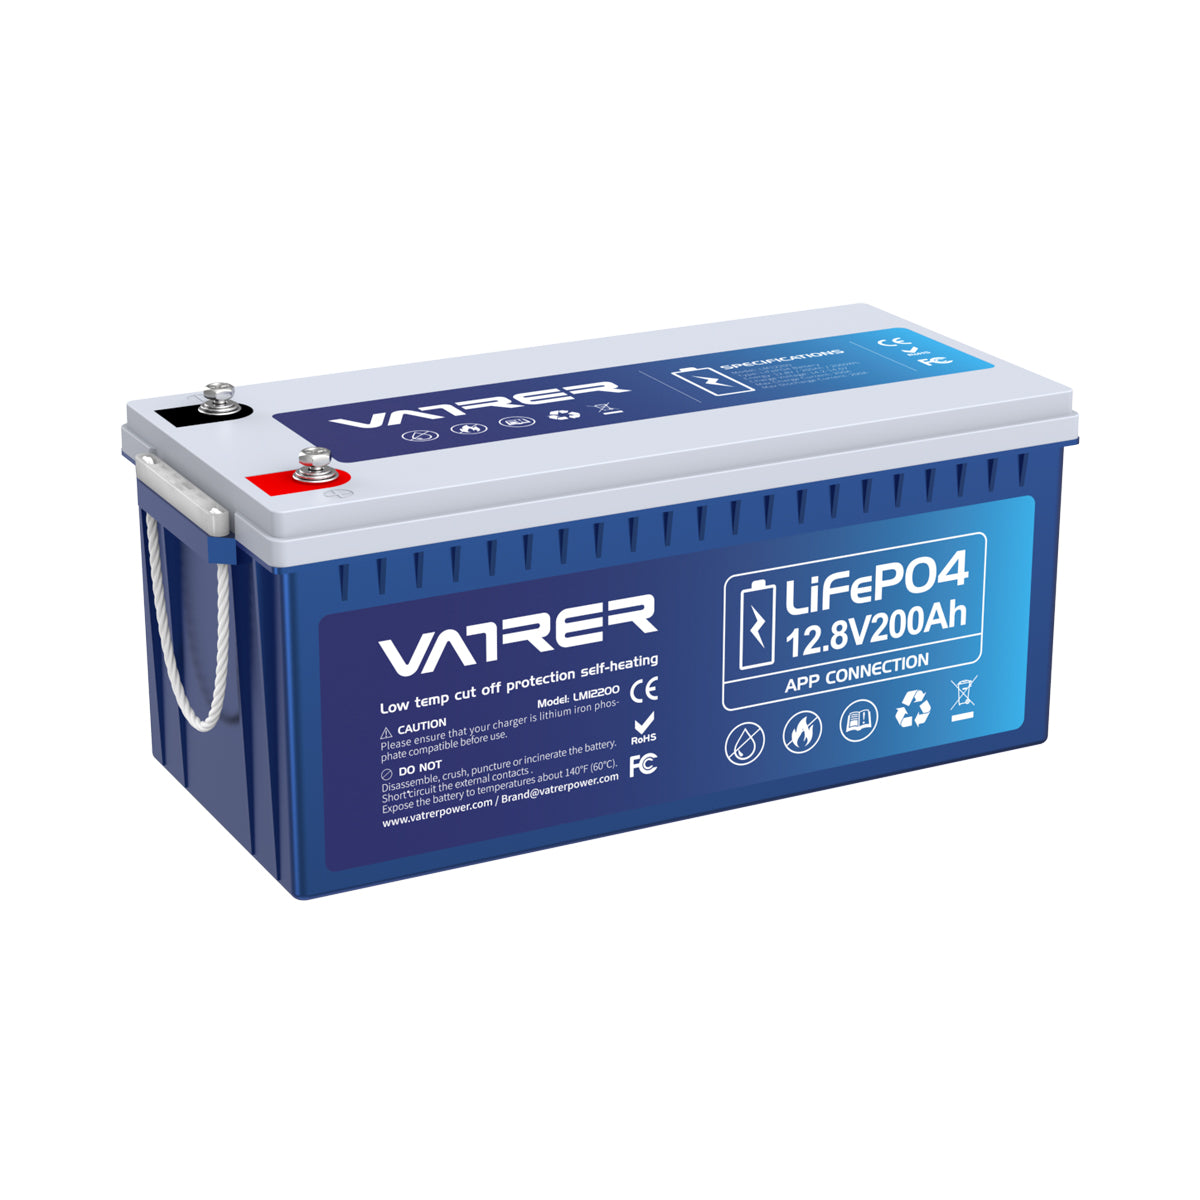 LiTime 24V 100Ah LiFePO4 Lithium Battery, Build-in 100A BMS, 2560Wh Energy  - 1 Pack 24V 100Ah